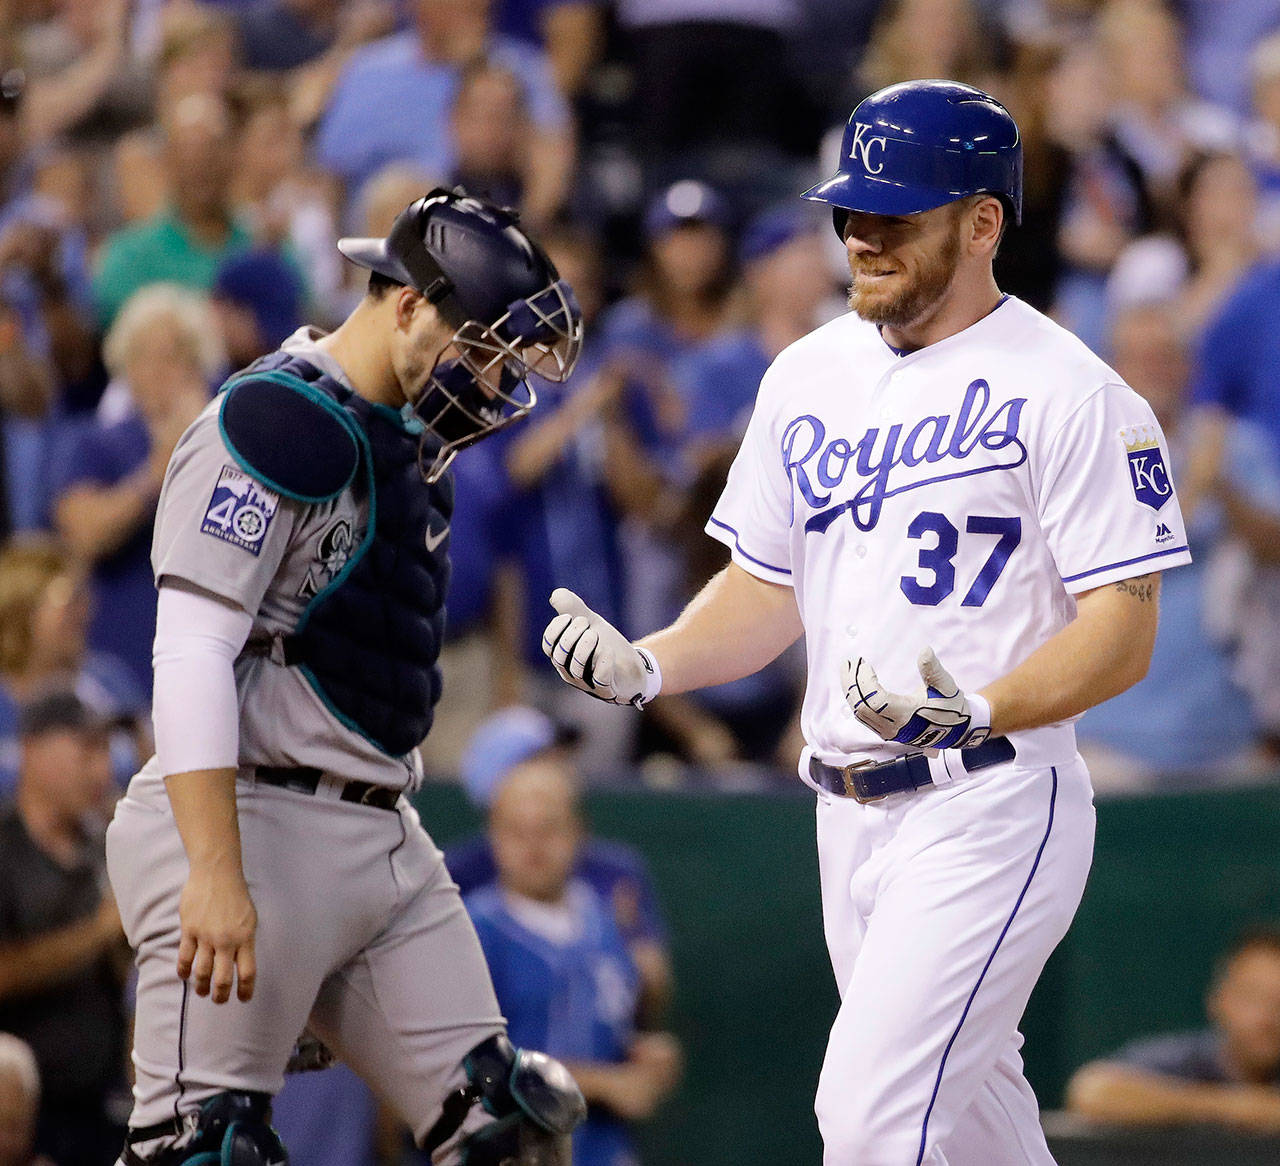 The Royals’ Brandon Moss (37) crosses the plate past Mariners catcher Mike Zunino after hitting a two-run home run during the fifth inning of a game Aug. 3, 2017, in Kansas City, Mo. (AP Photo/Charlie Riedel)